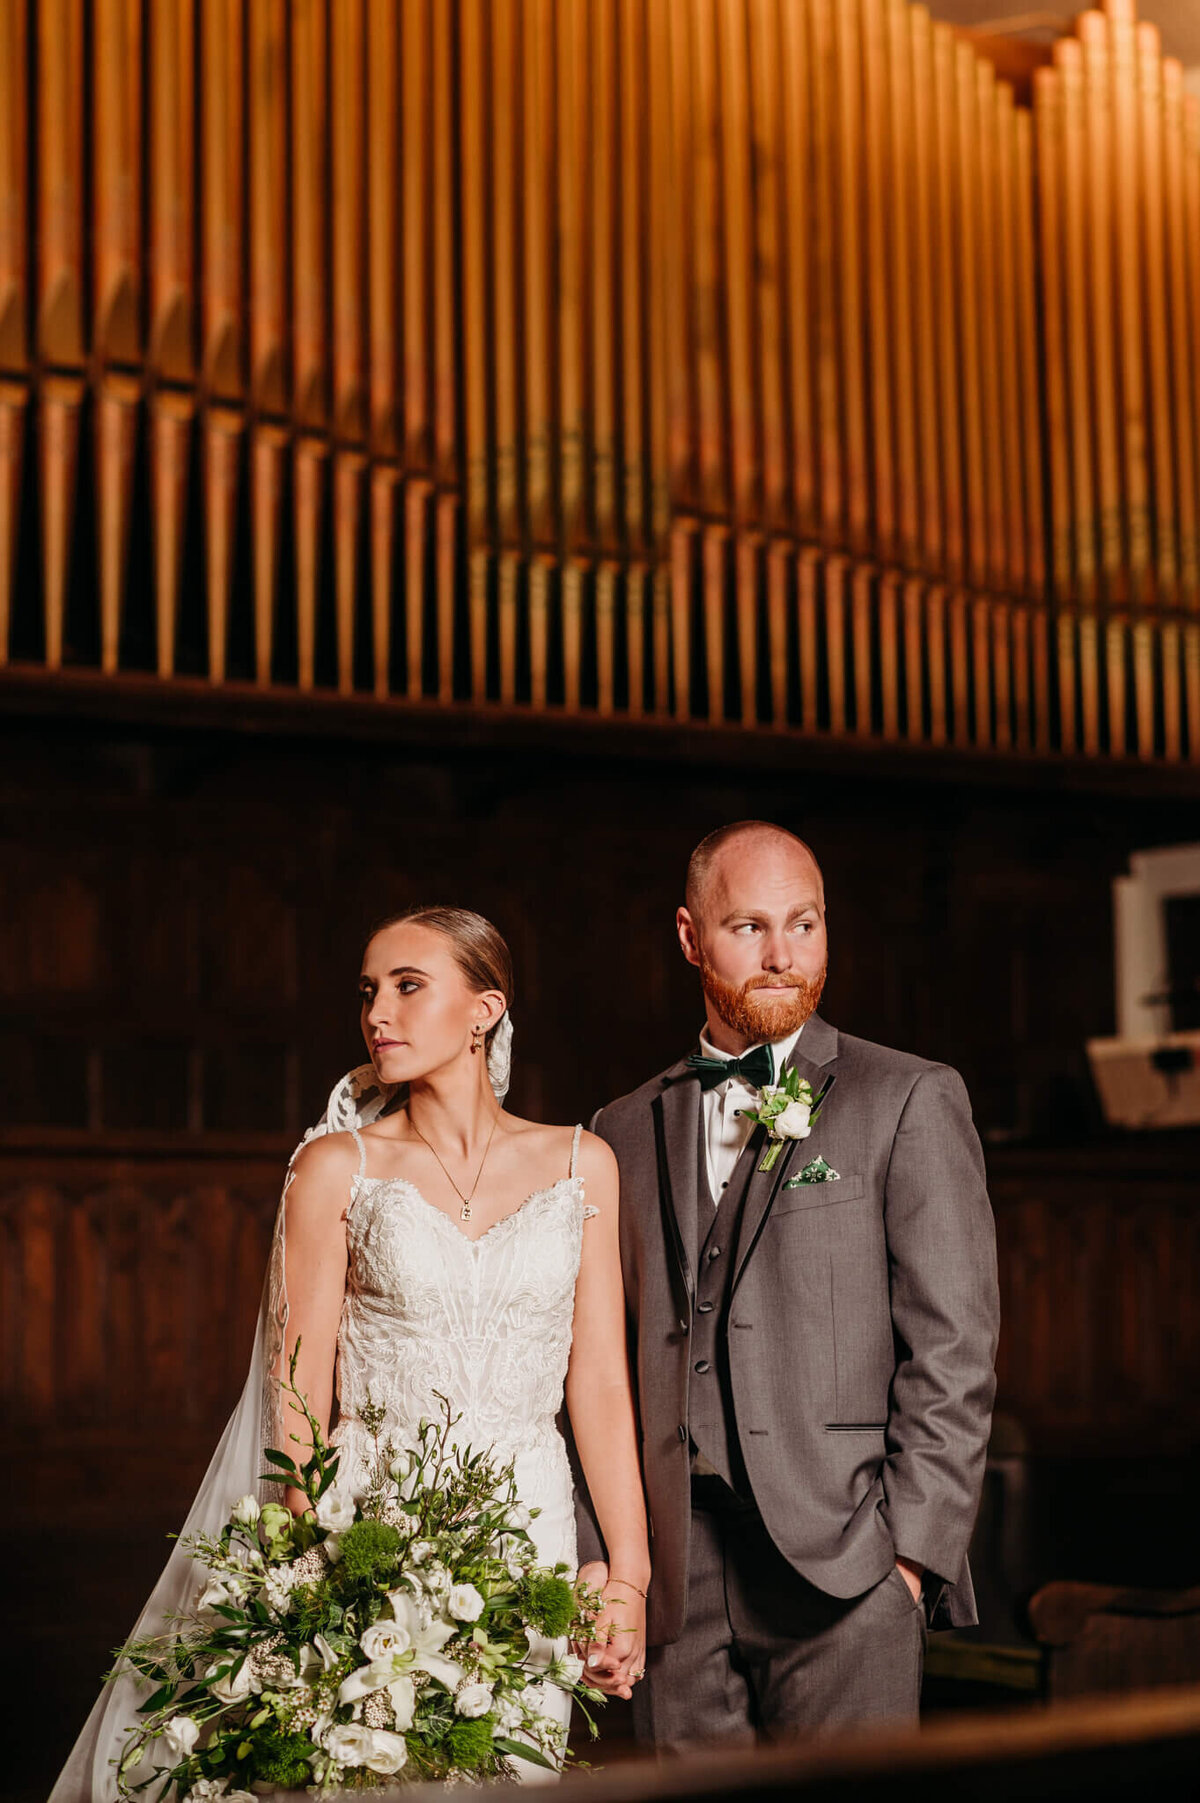 Photo of a bride and groom holding hands and looking away with an organ in the background